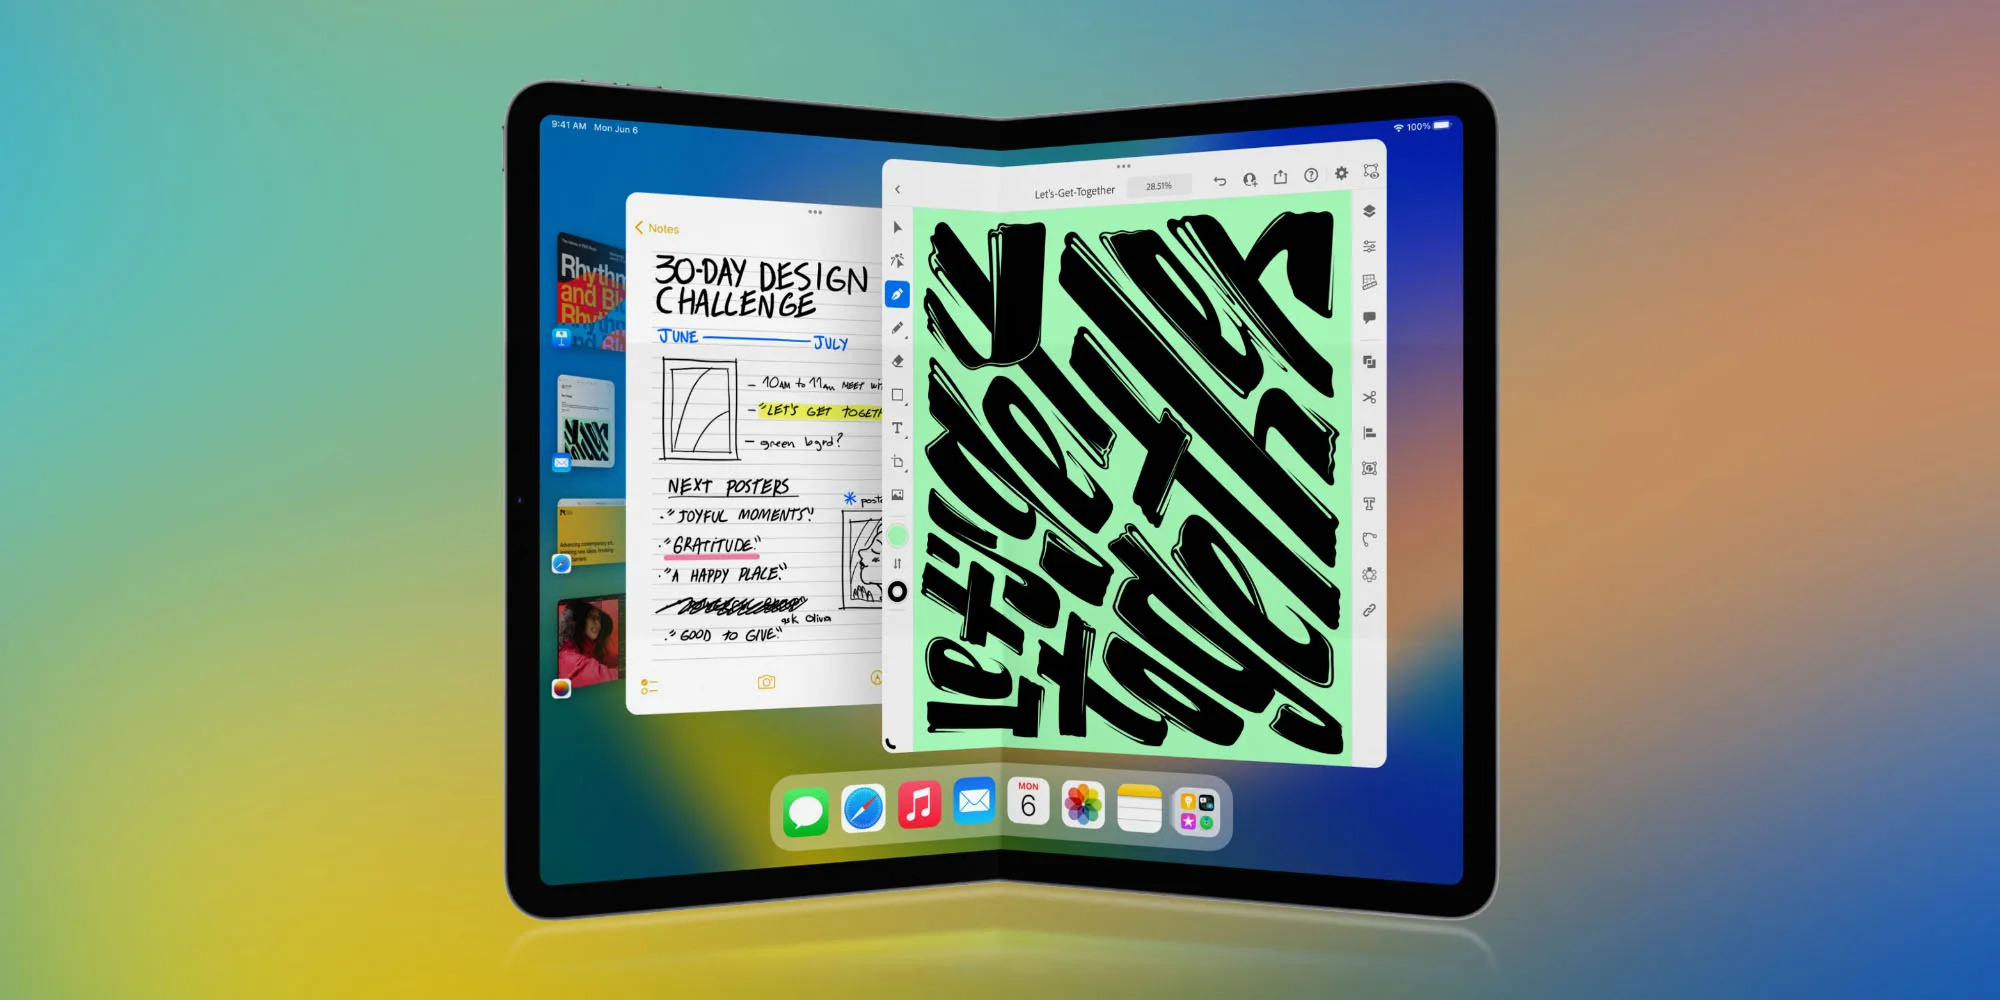 Foldable IPad: News And Expected Price, Release Date, Specs; And More Rumors